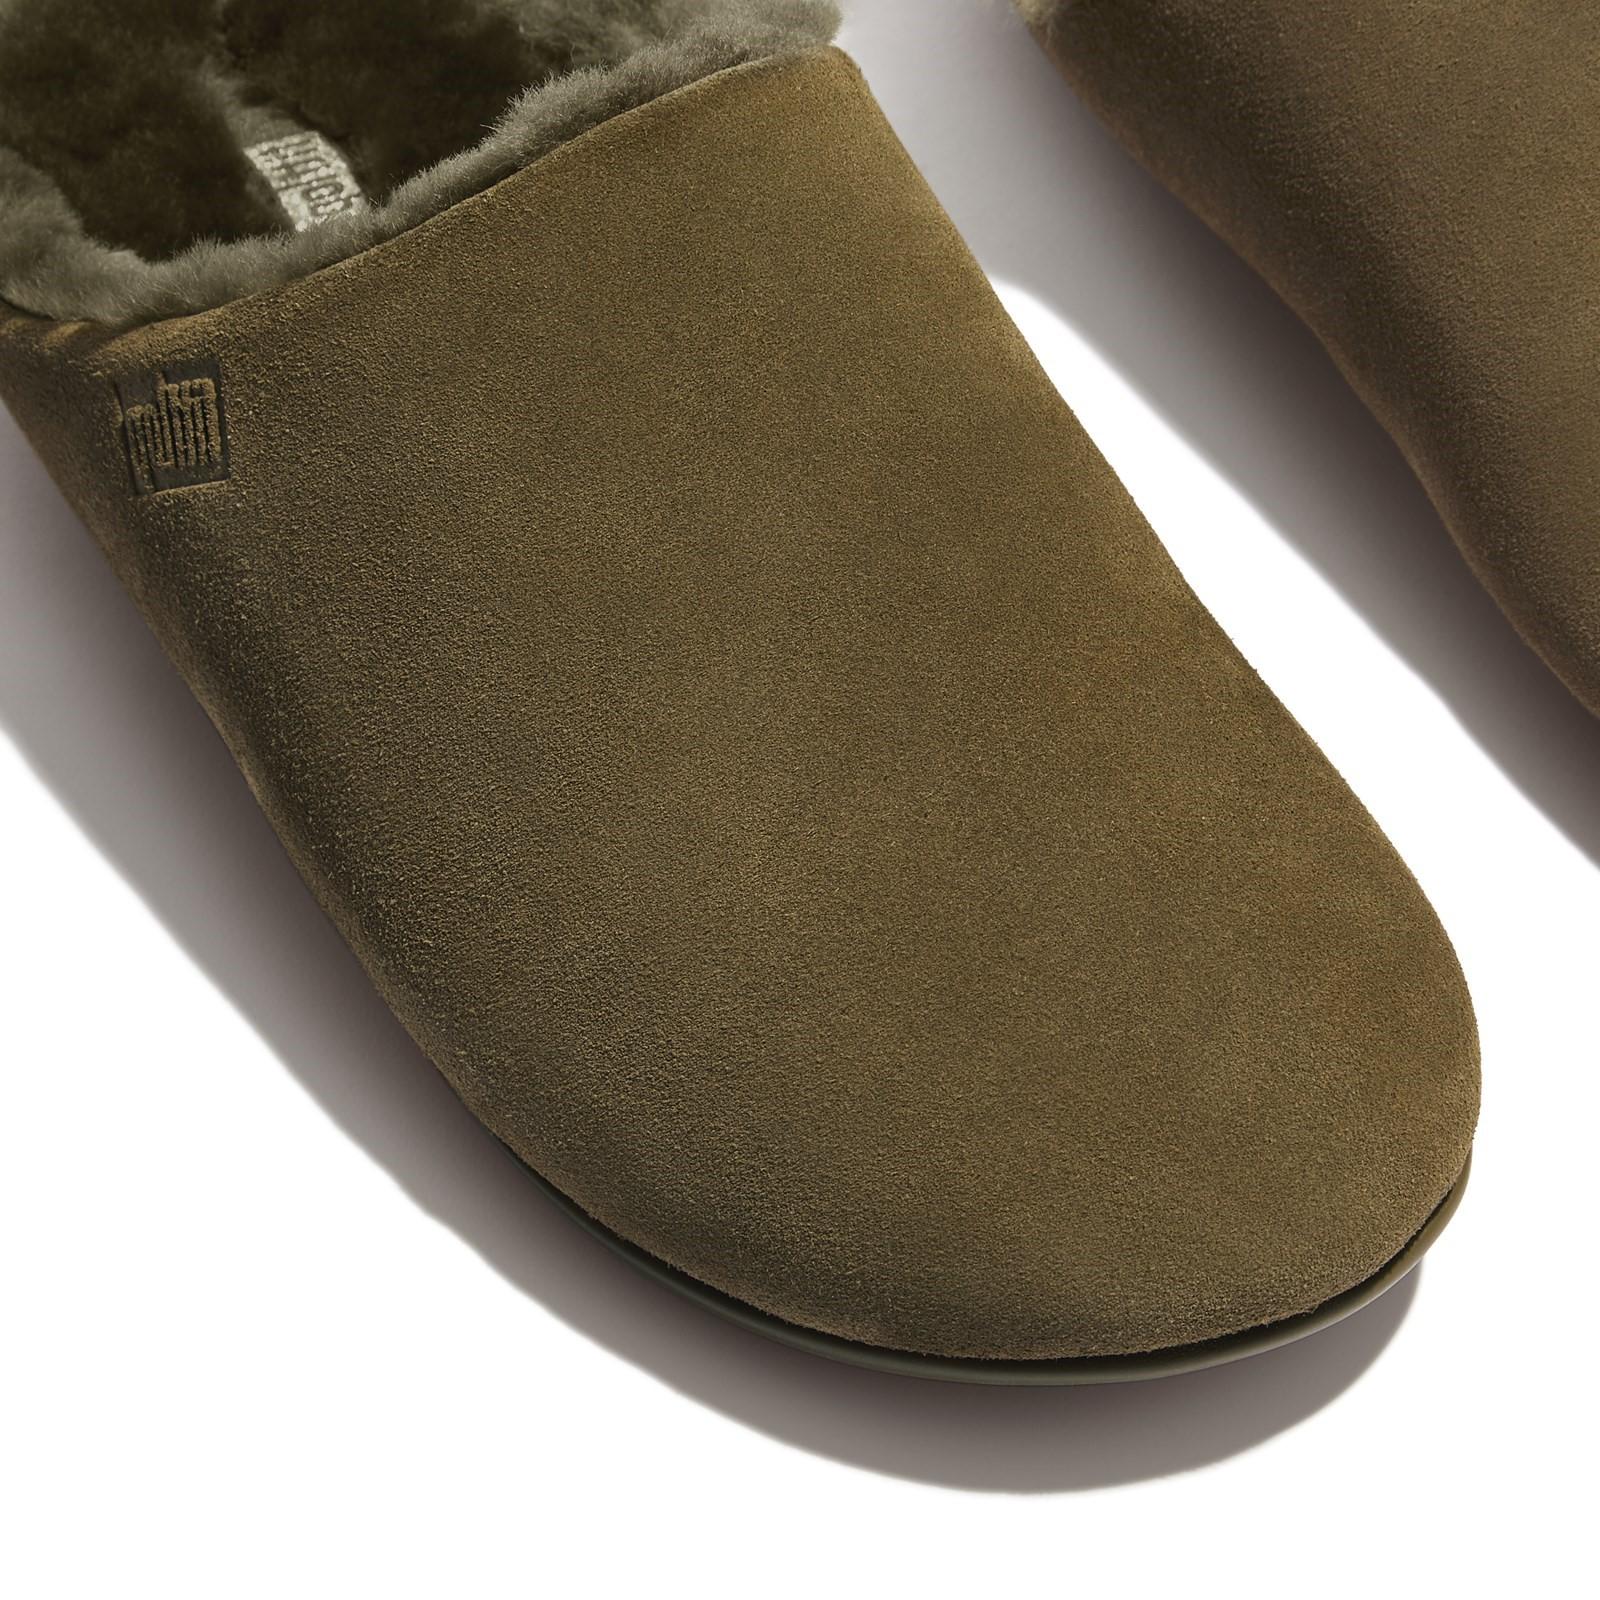 Fitflop Chrissie Shearling-Lined Suede Slippers